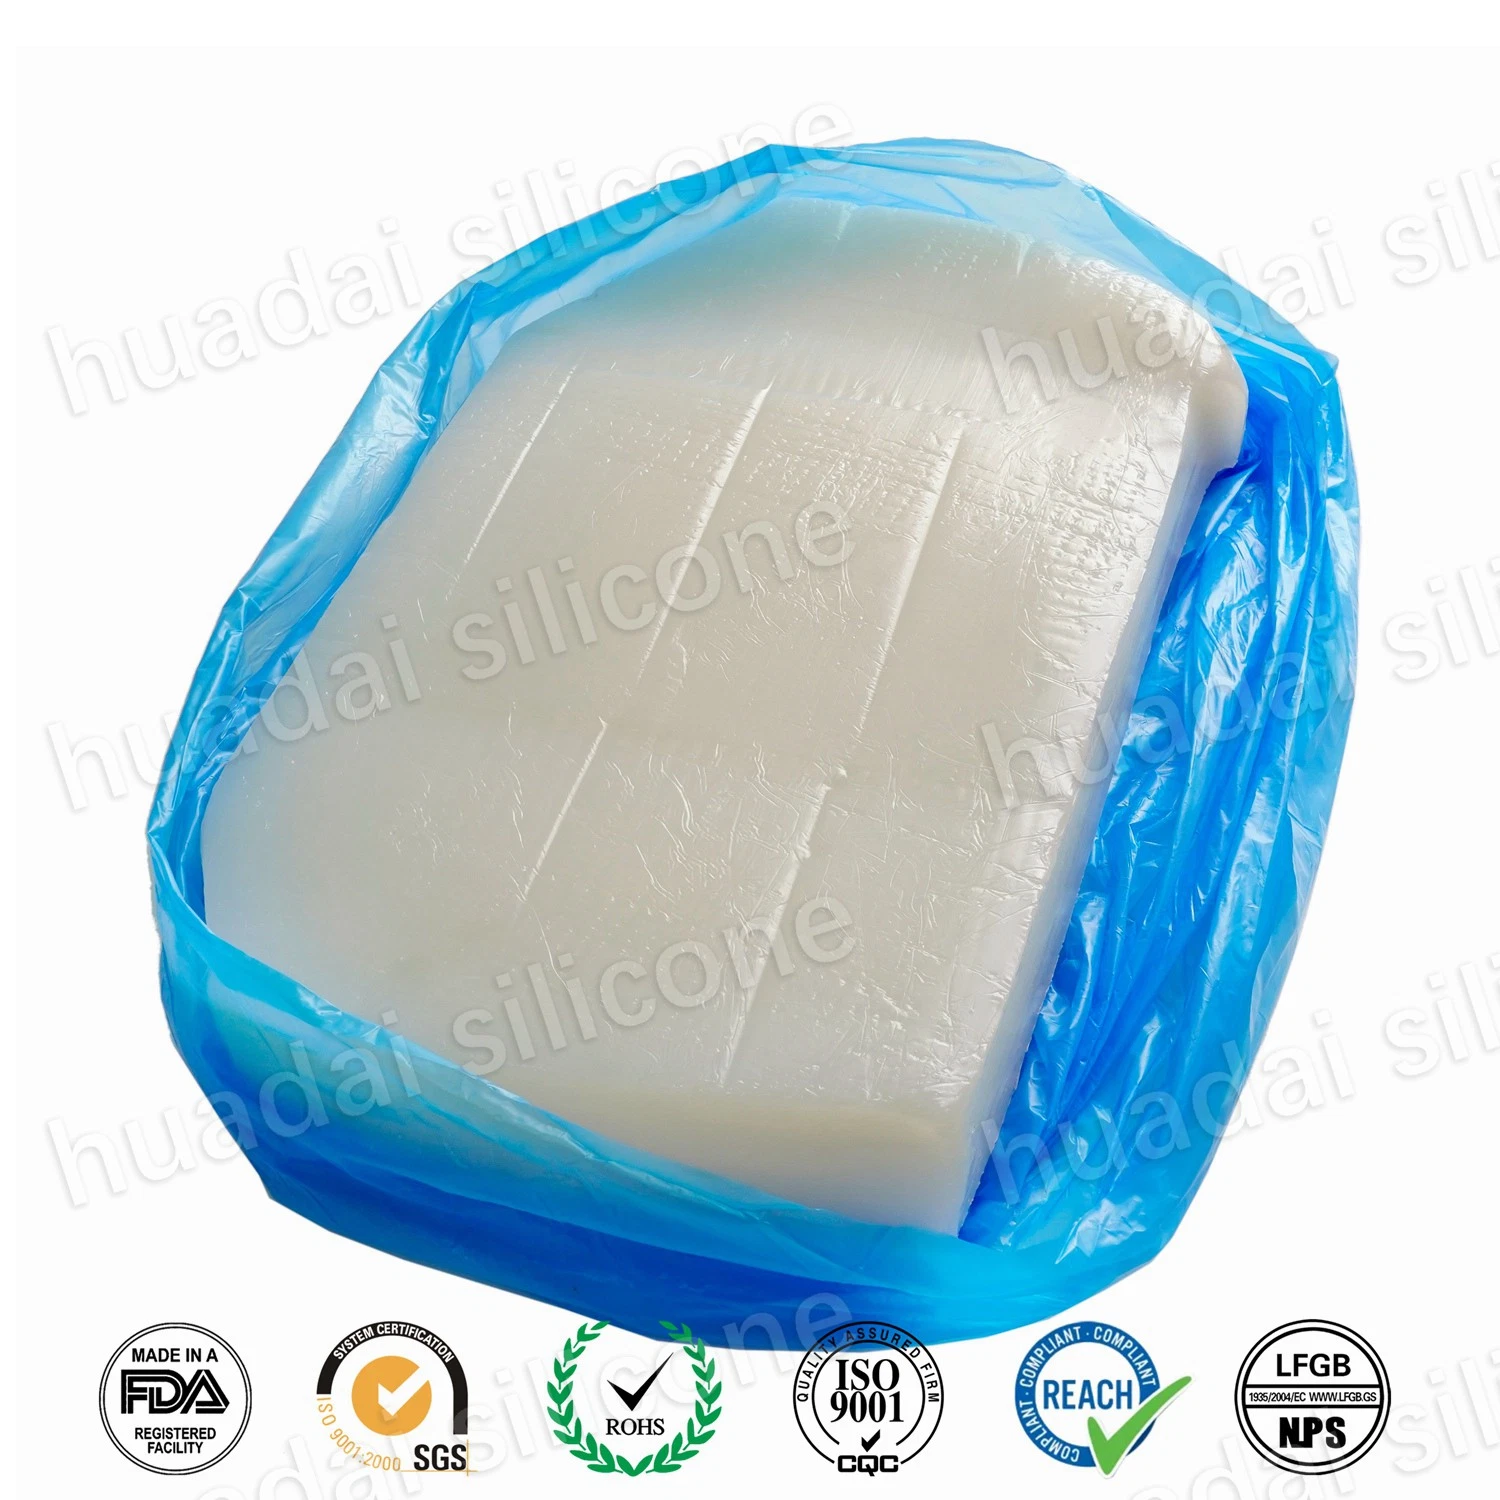 Custom Translucent Solid Silicone Rubber Material for Making Push Buttons MIDI Controller Keyboard